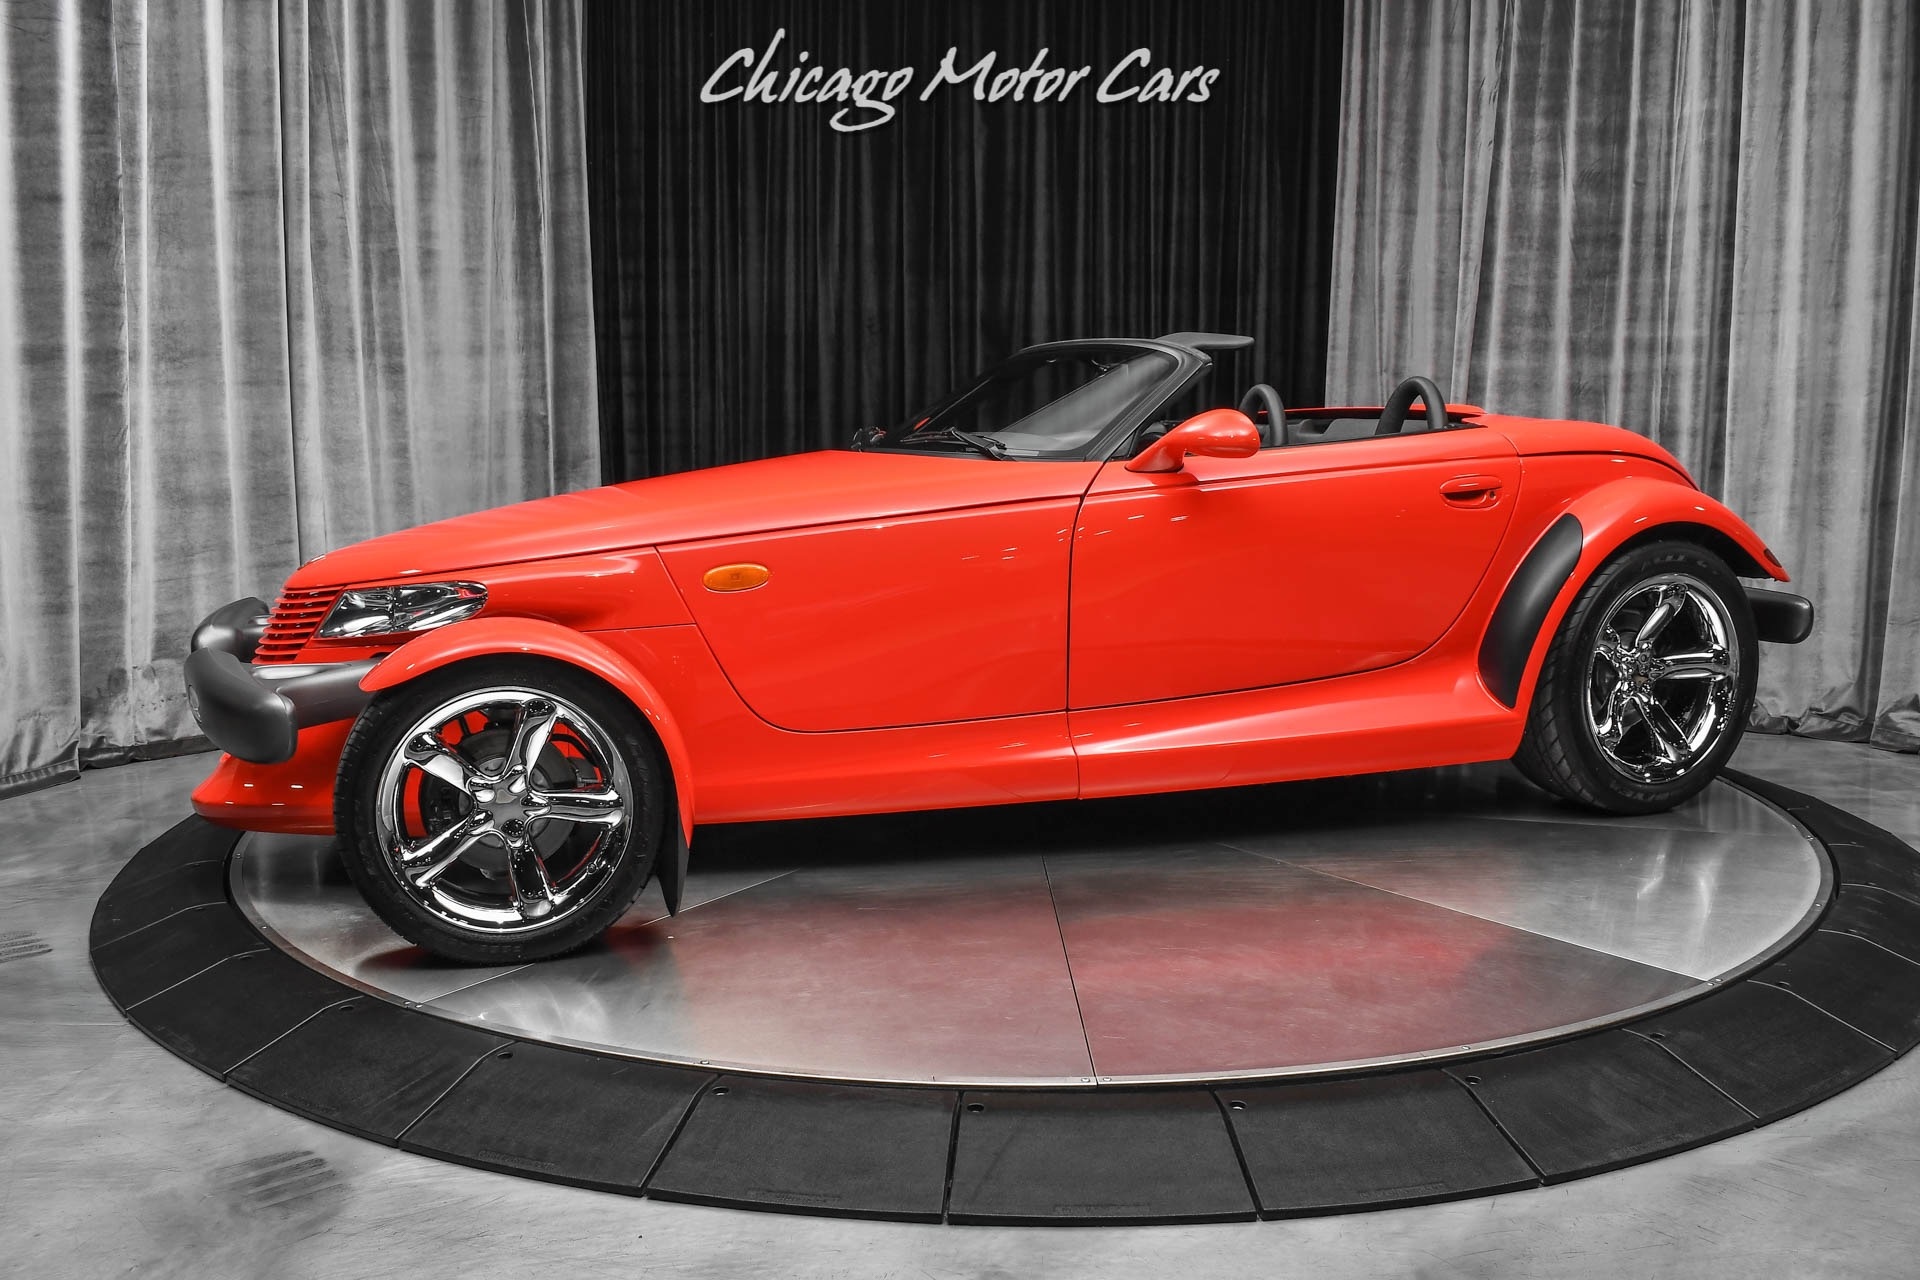 Plymouth Prowler, Rare collectable, Low mileage, Modern day hot rod, 1920x1280 HD Desktop